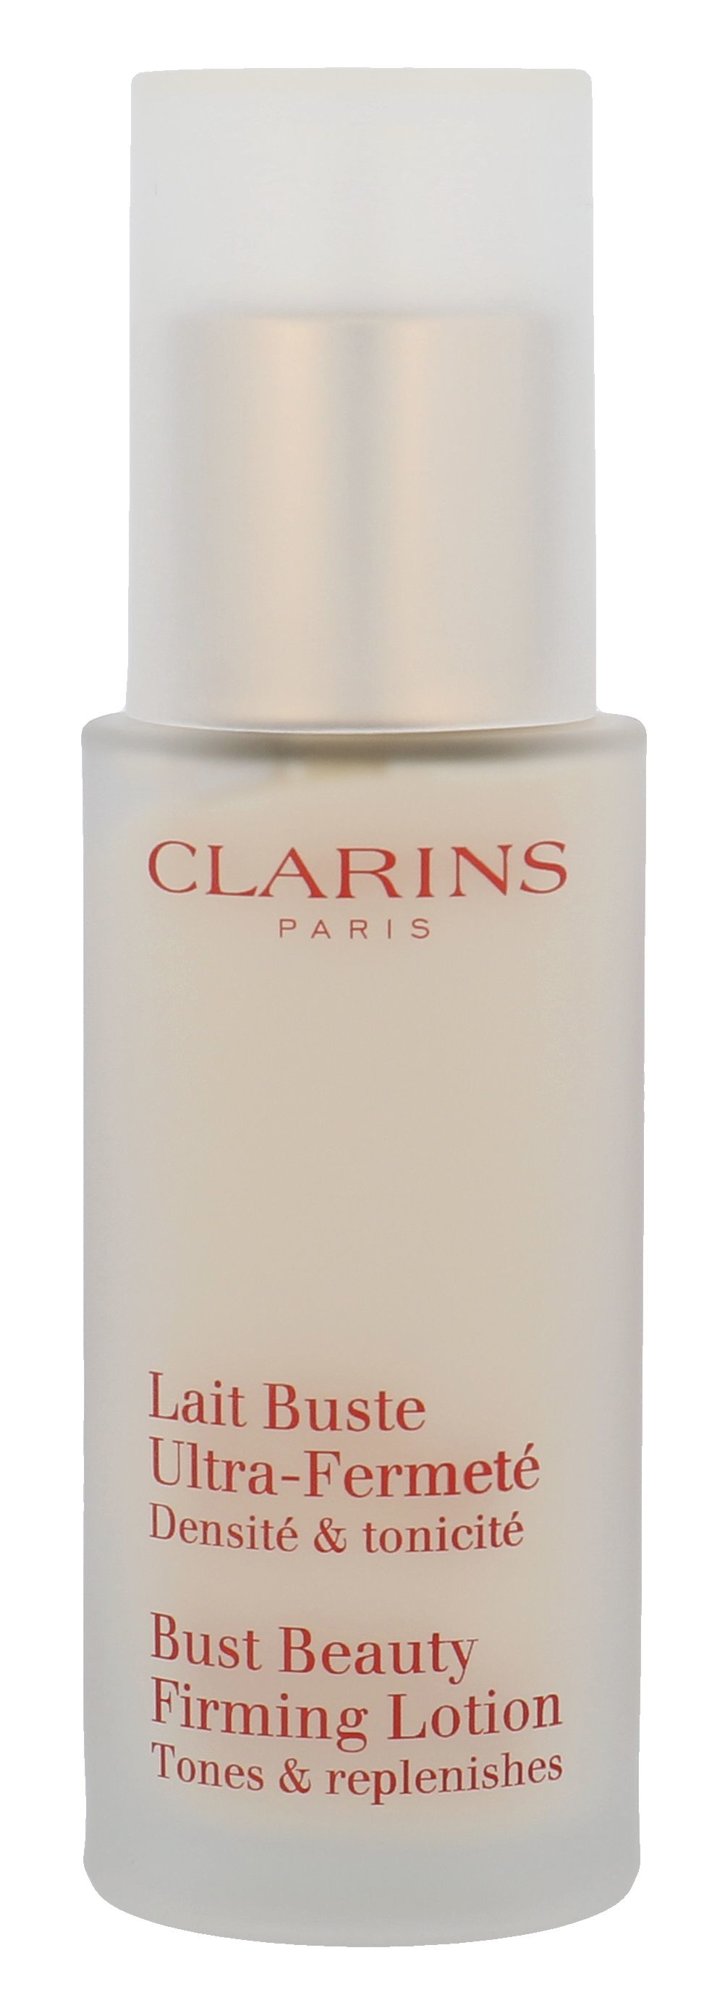 Clarins Age Control & Firming Care Bust Beauty